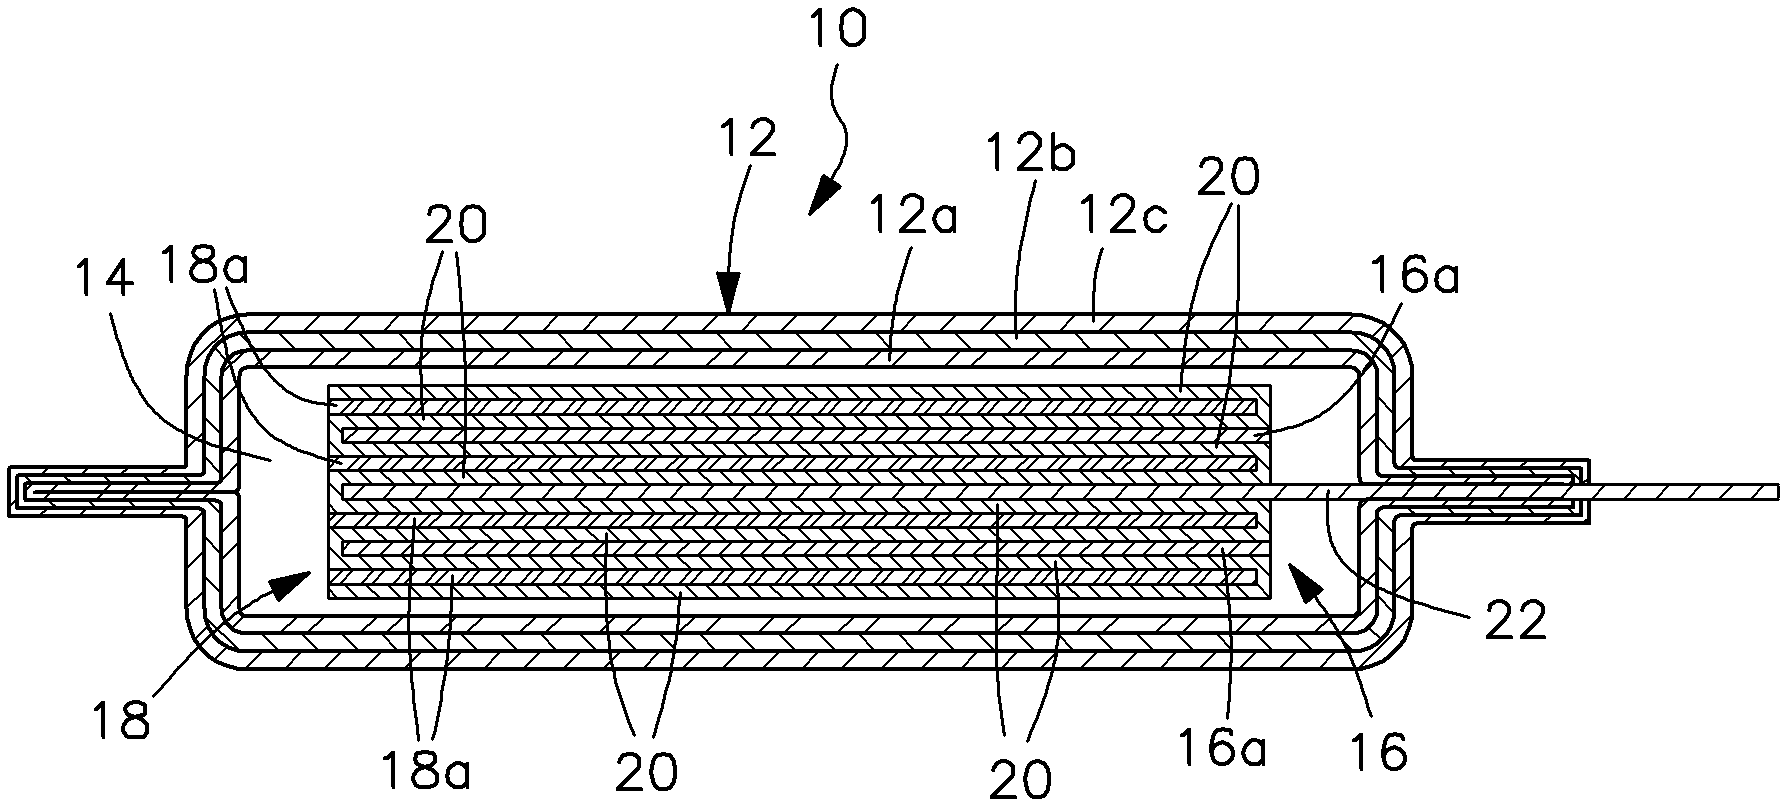 Lithium battery core capable of radiating heat by directly conducting heat from internal to external